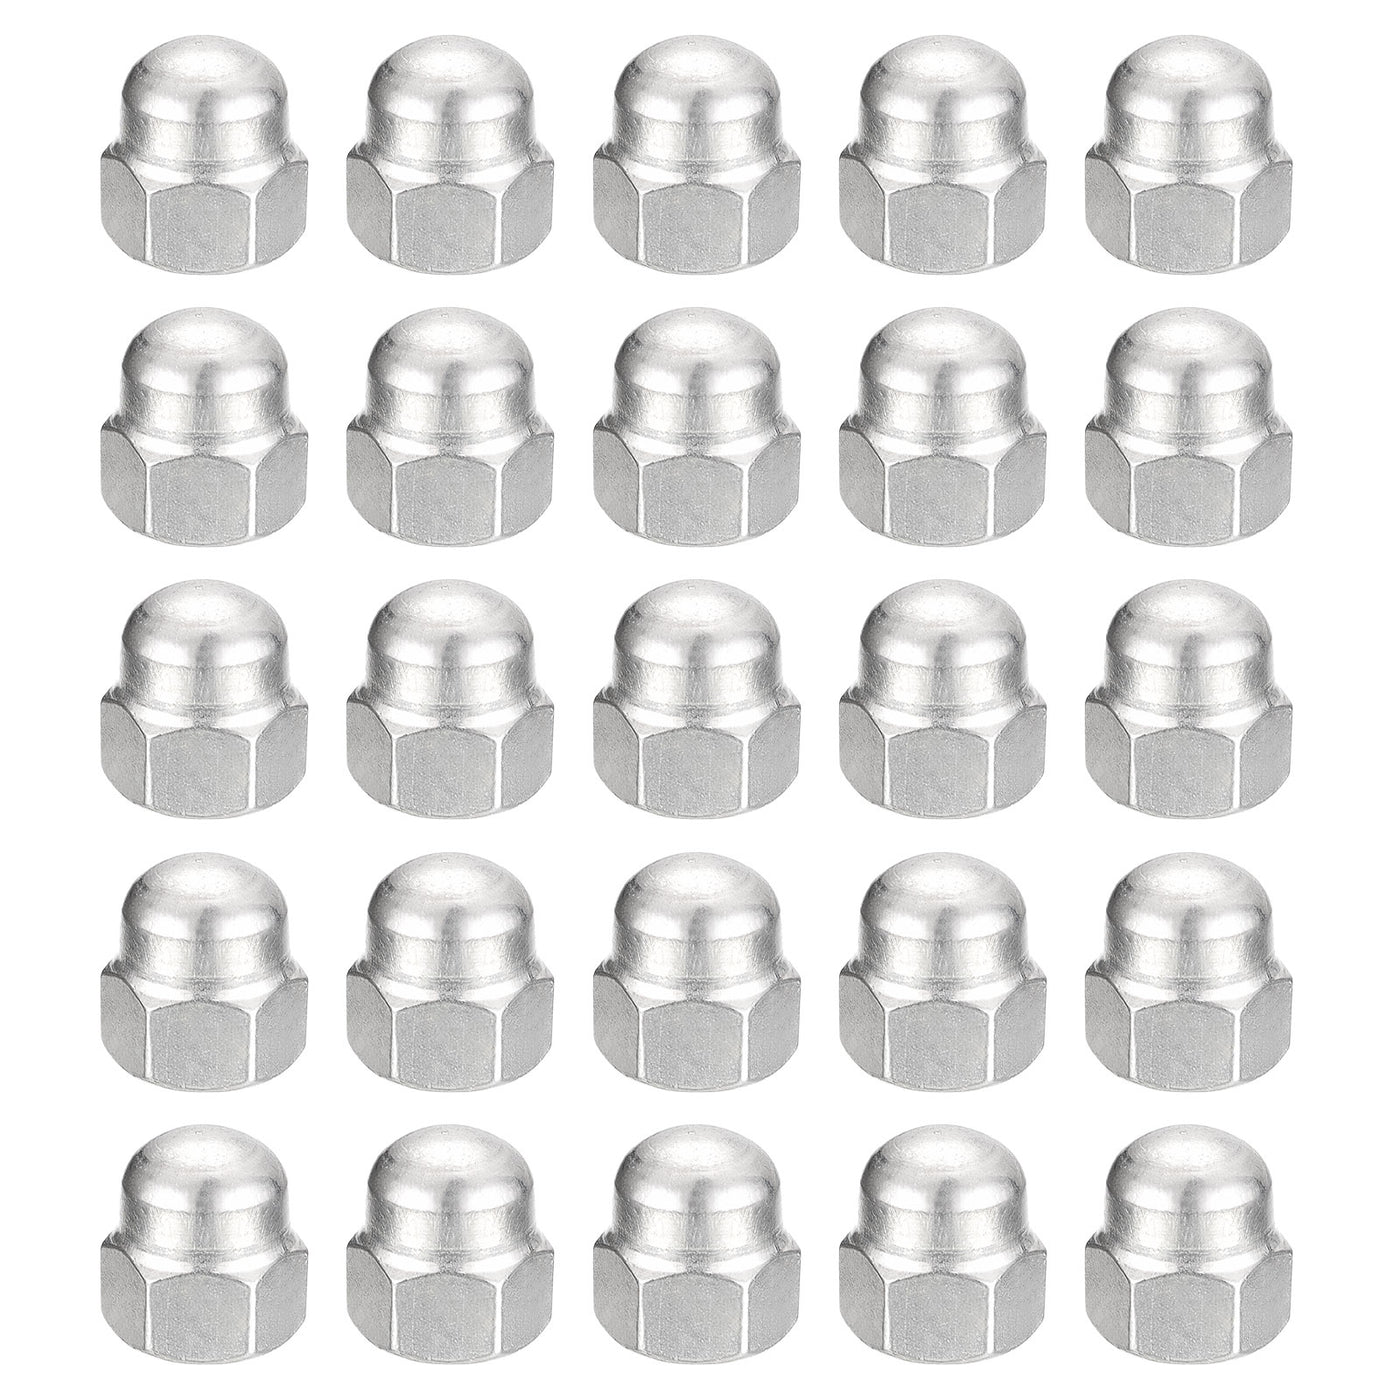 uxcell Uxcell 7/16-14 Acorn Cap Nuts,25pcs - 304 Stainless Steel Hardware Nuts, Acorn Hex Cap Dome Head Nuts for Fasteners (Silver)